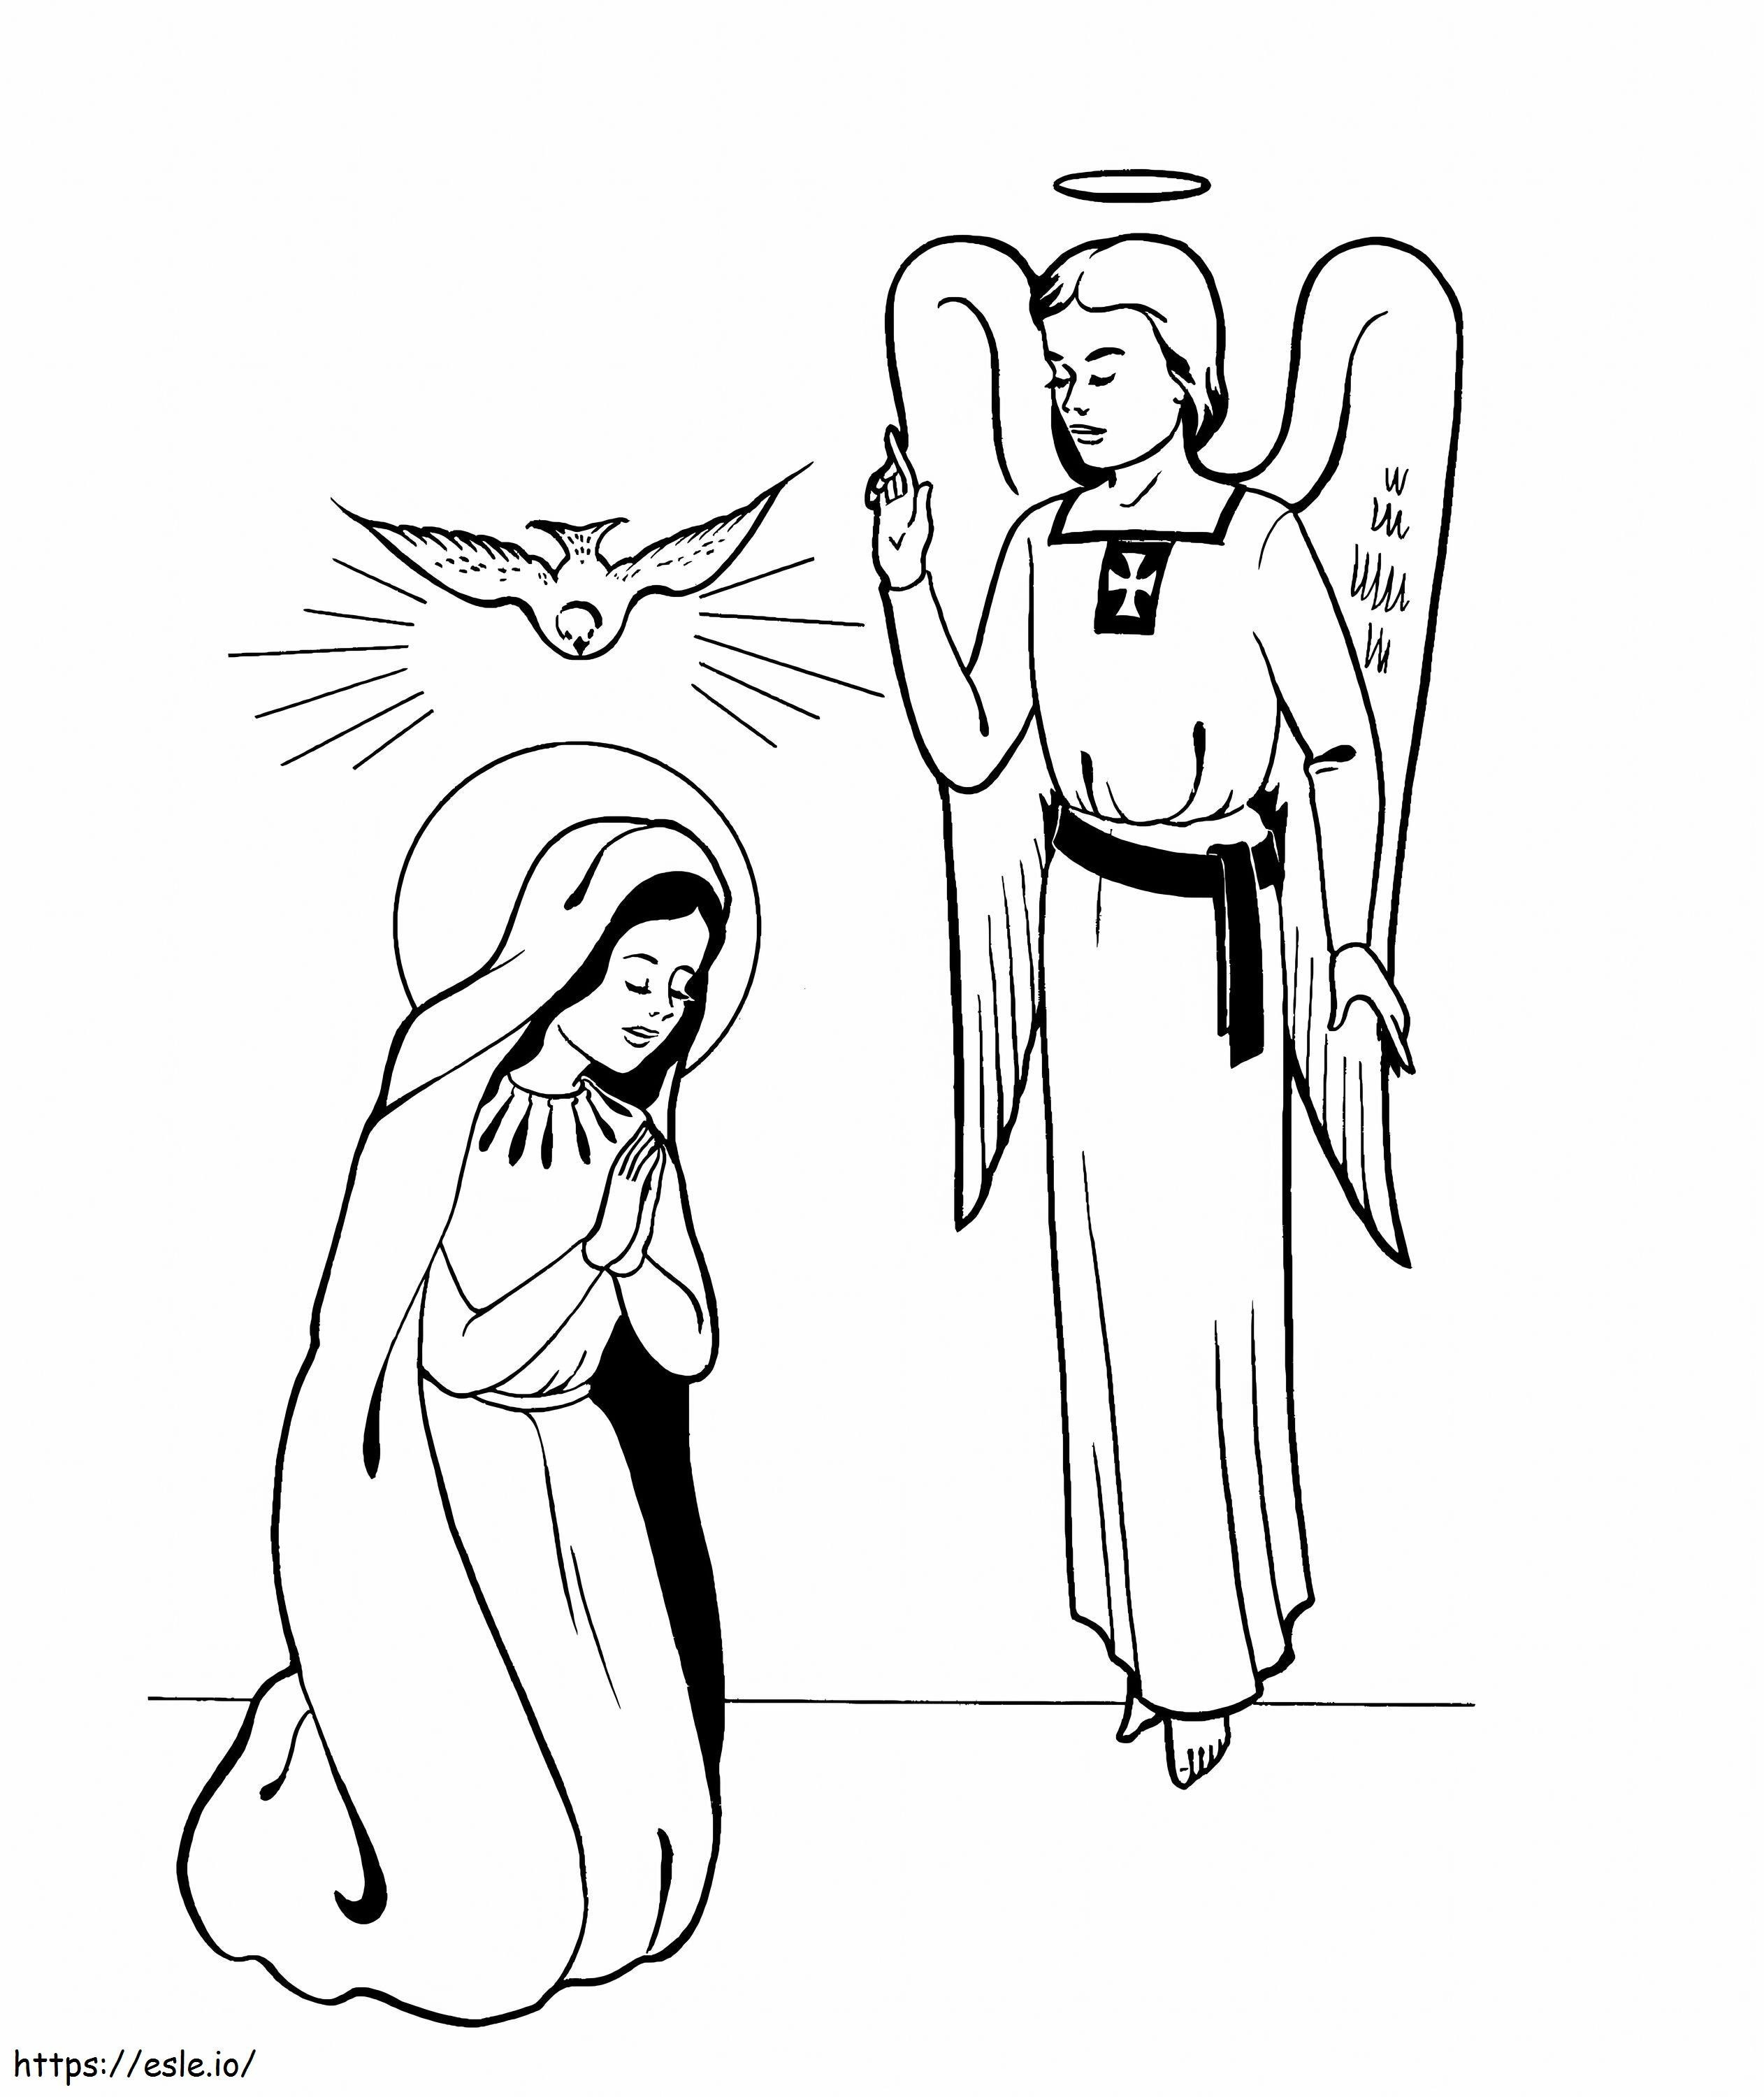 Free Mother Of Jesus Image To Color coloring page